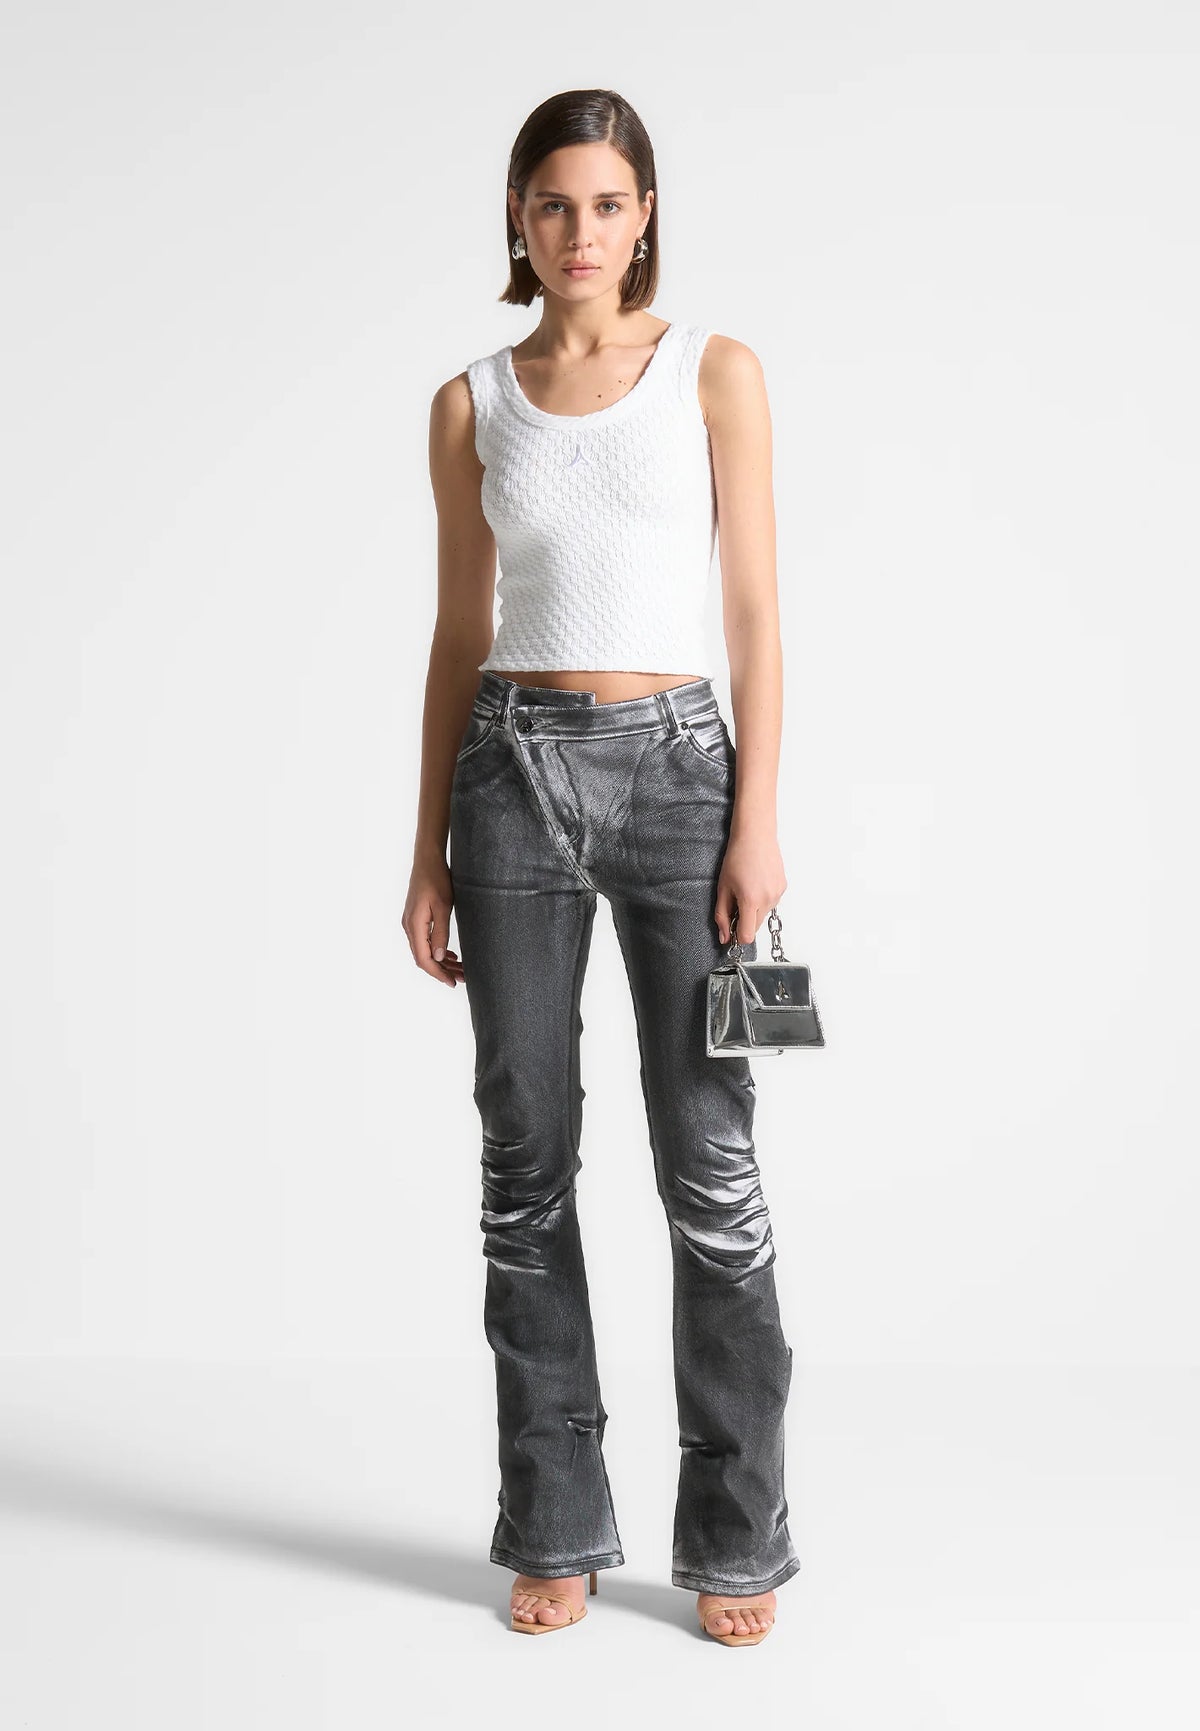 Oil Print Tacked Fit And Flare Jeans